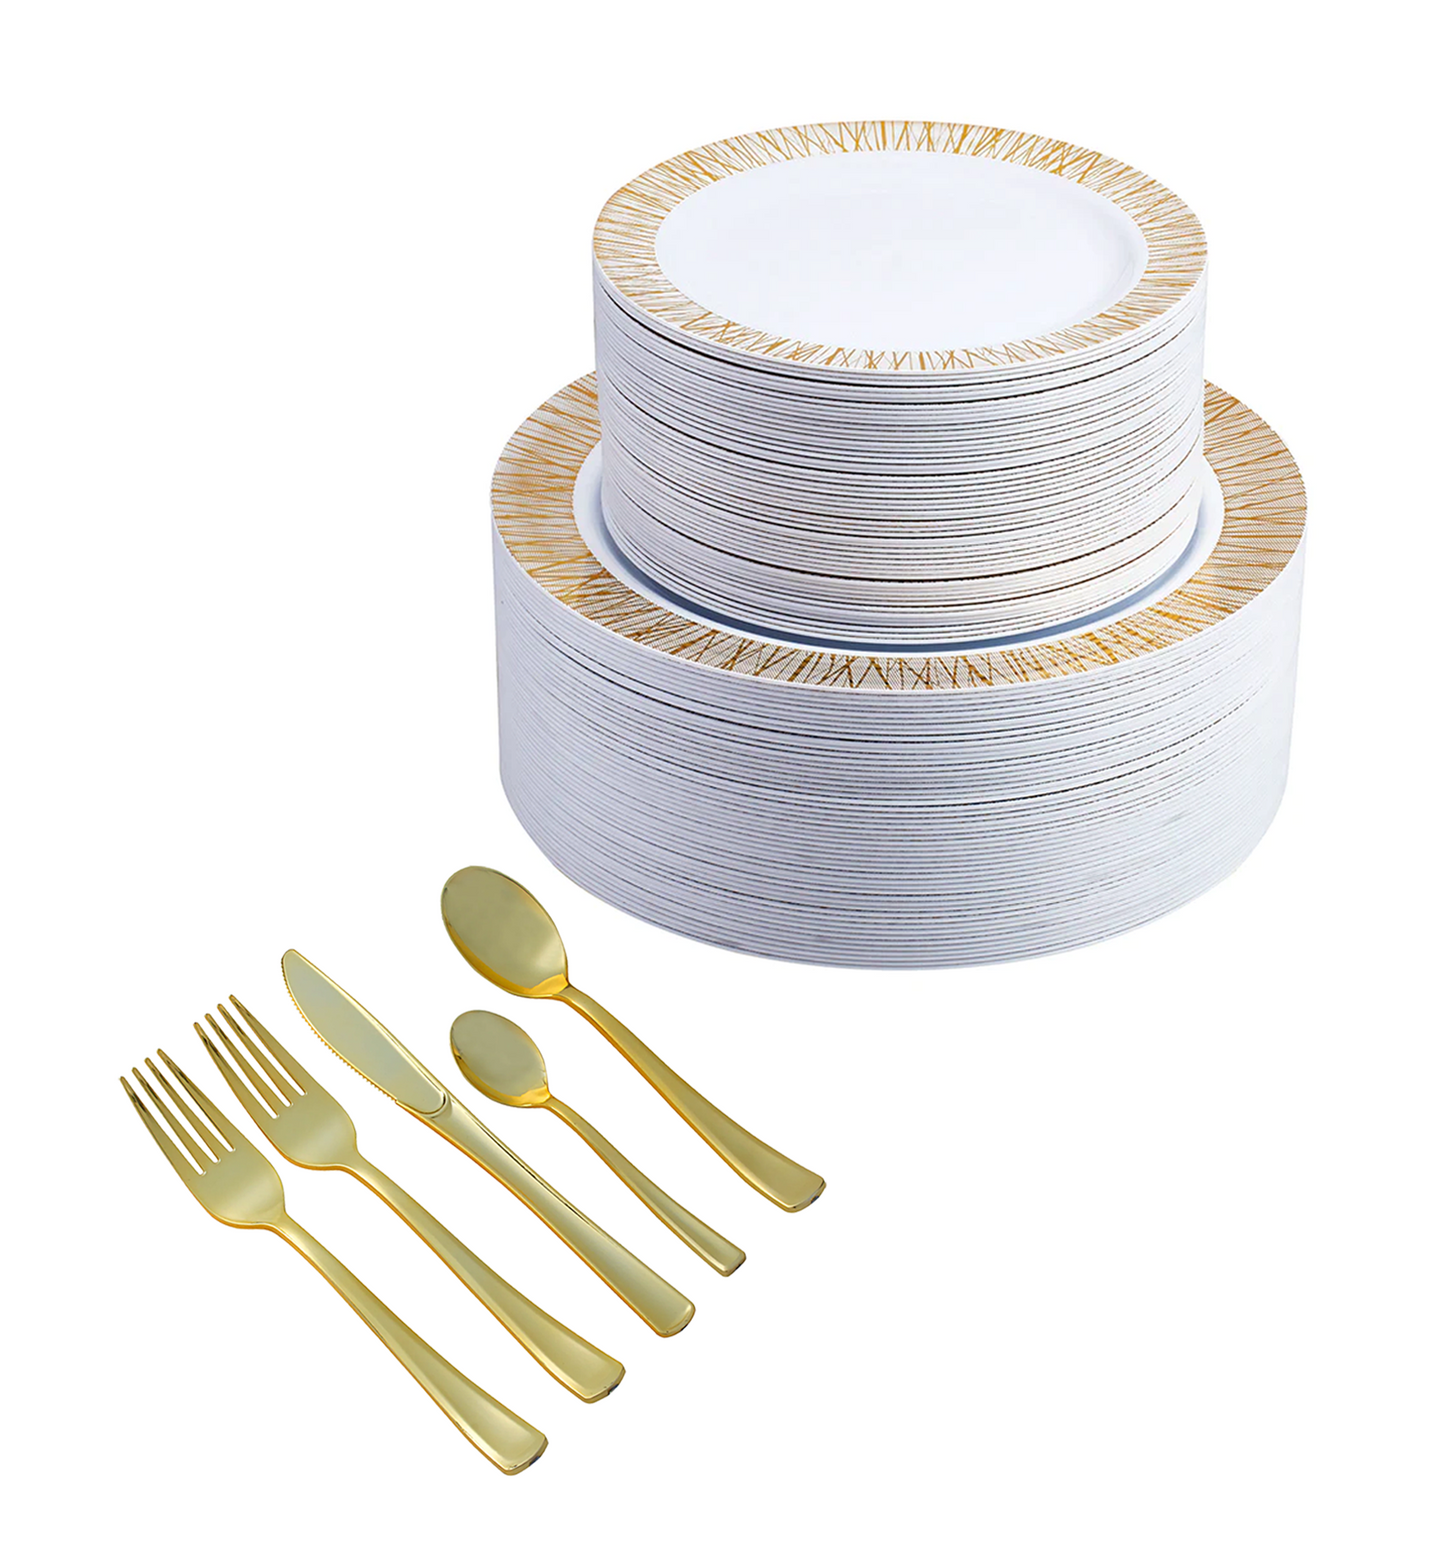 350-Piece Gold Dinnerware set for 50 guests Includes: 100 gold design plastic plates, 250 gold plastic silverware utensils